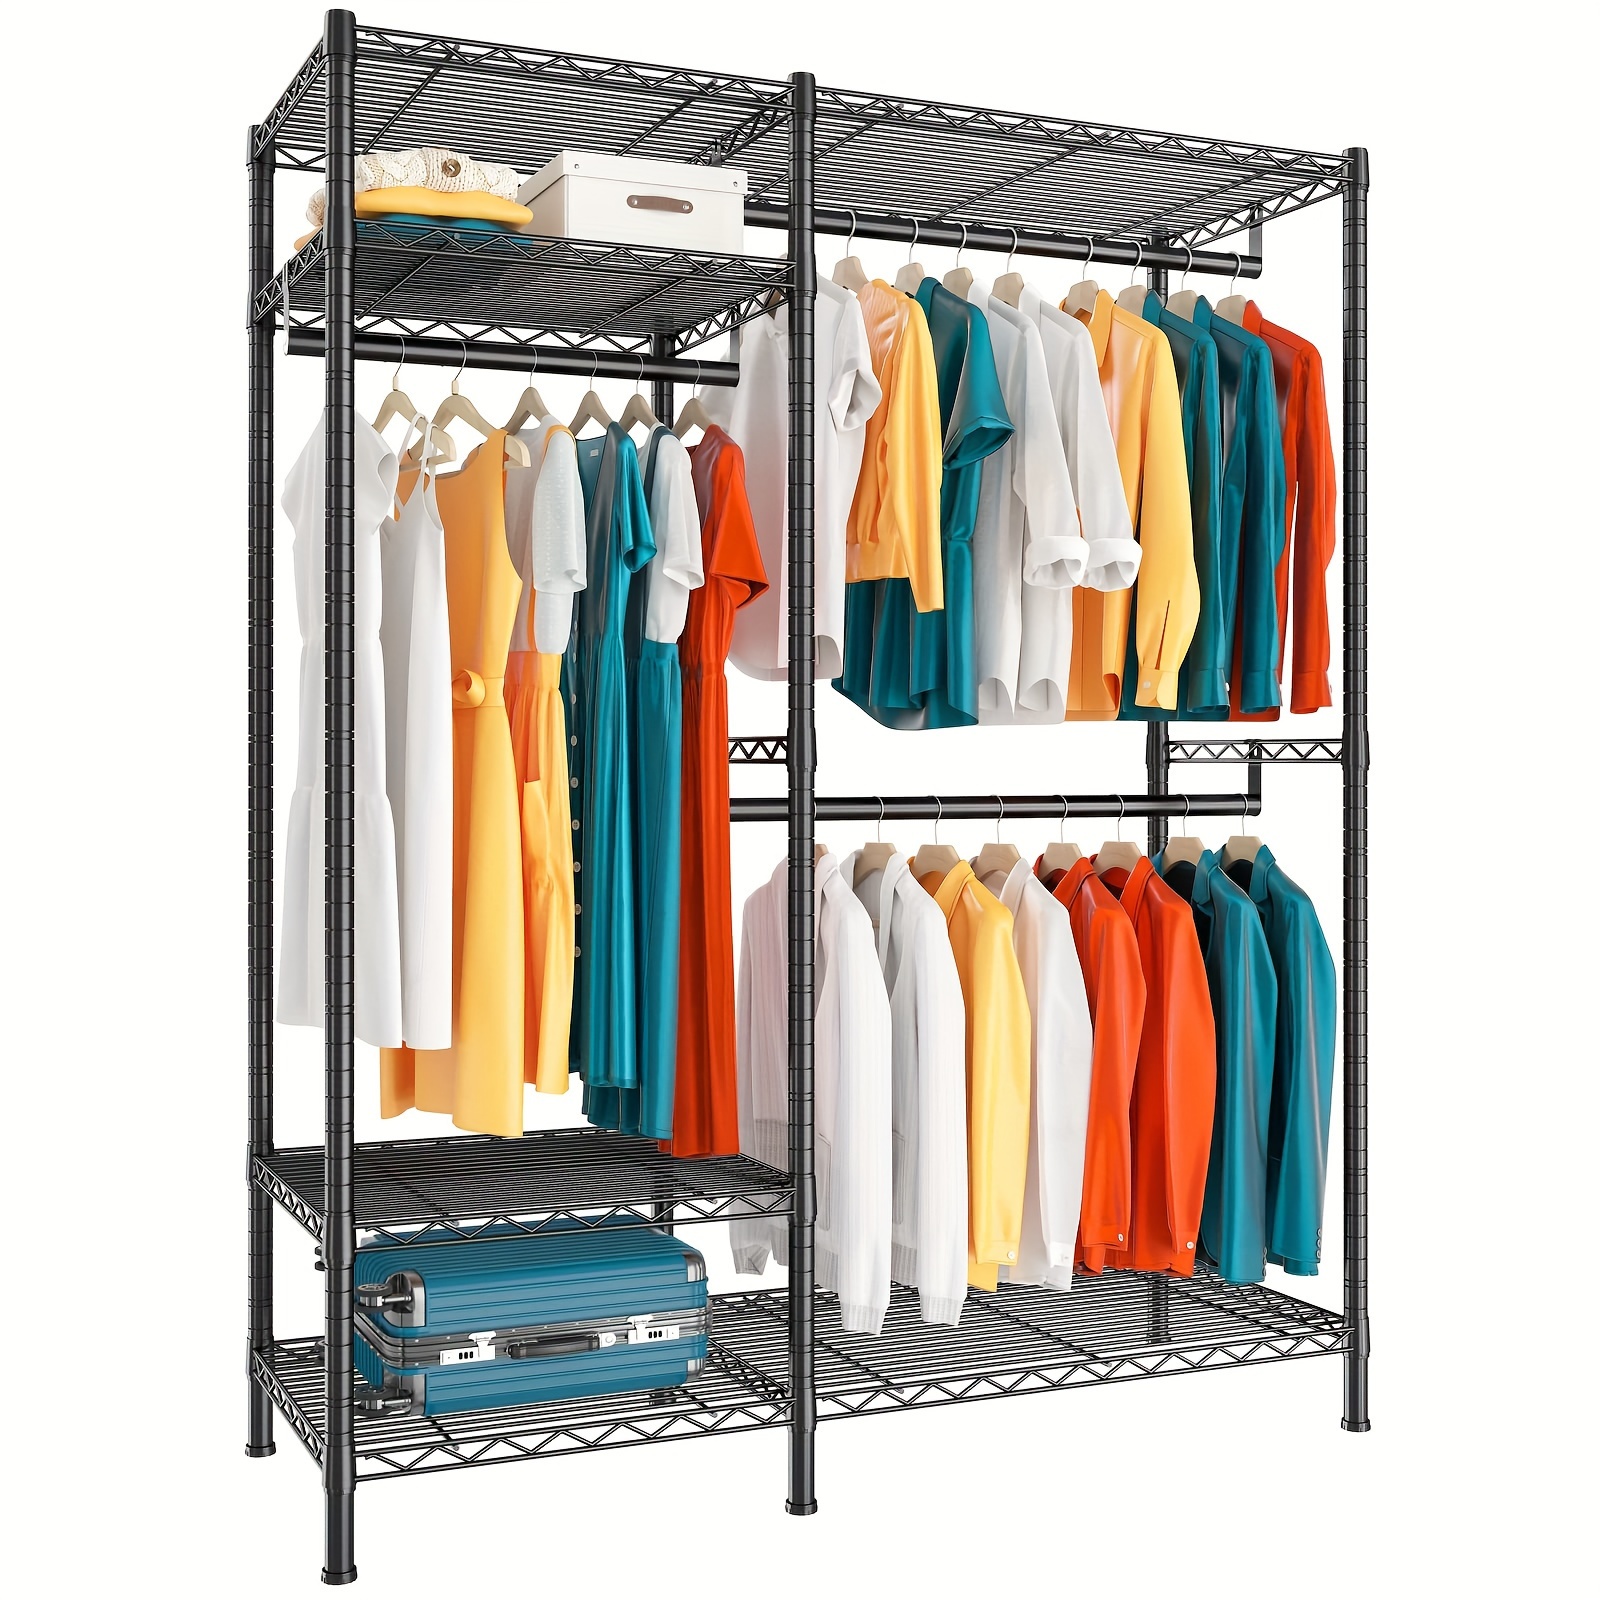 

Clothes Rack Heavy Duty Clothing Rack Load 700lbs Clothing Racks For Hanging Clothes Adjustable Closet Rack Metal Wadrobe Closet Wire Garment Rack Clothes Rack 45.5" W X 77" H X 16.5" D Black